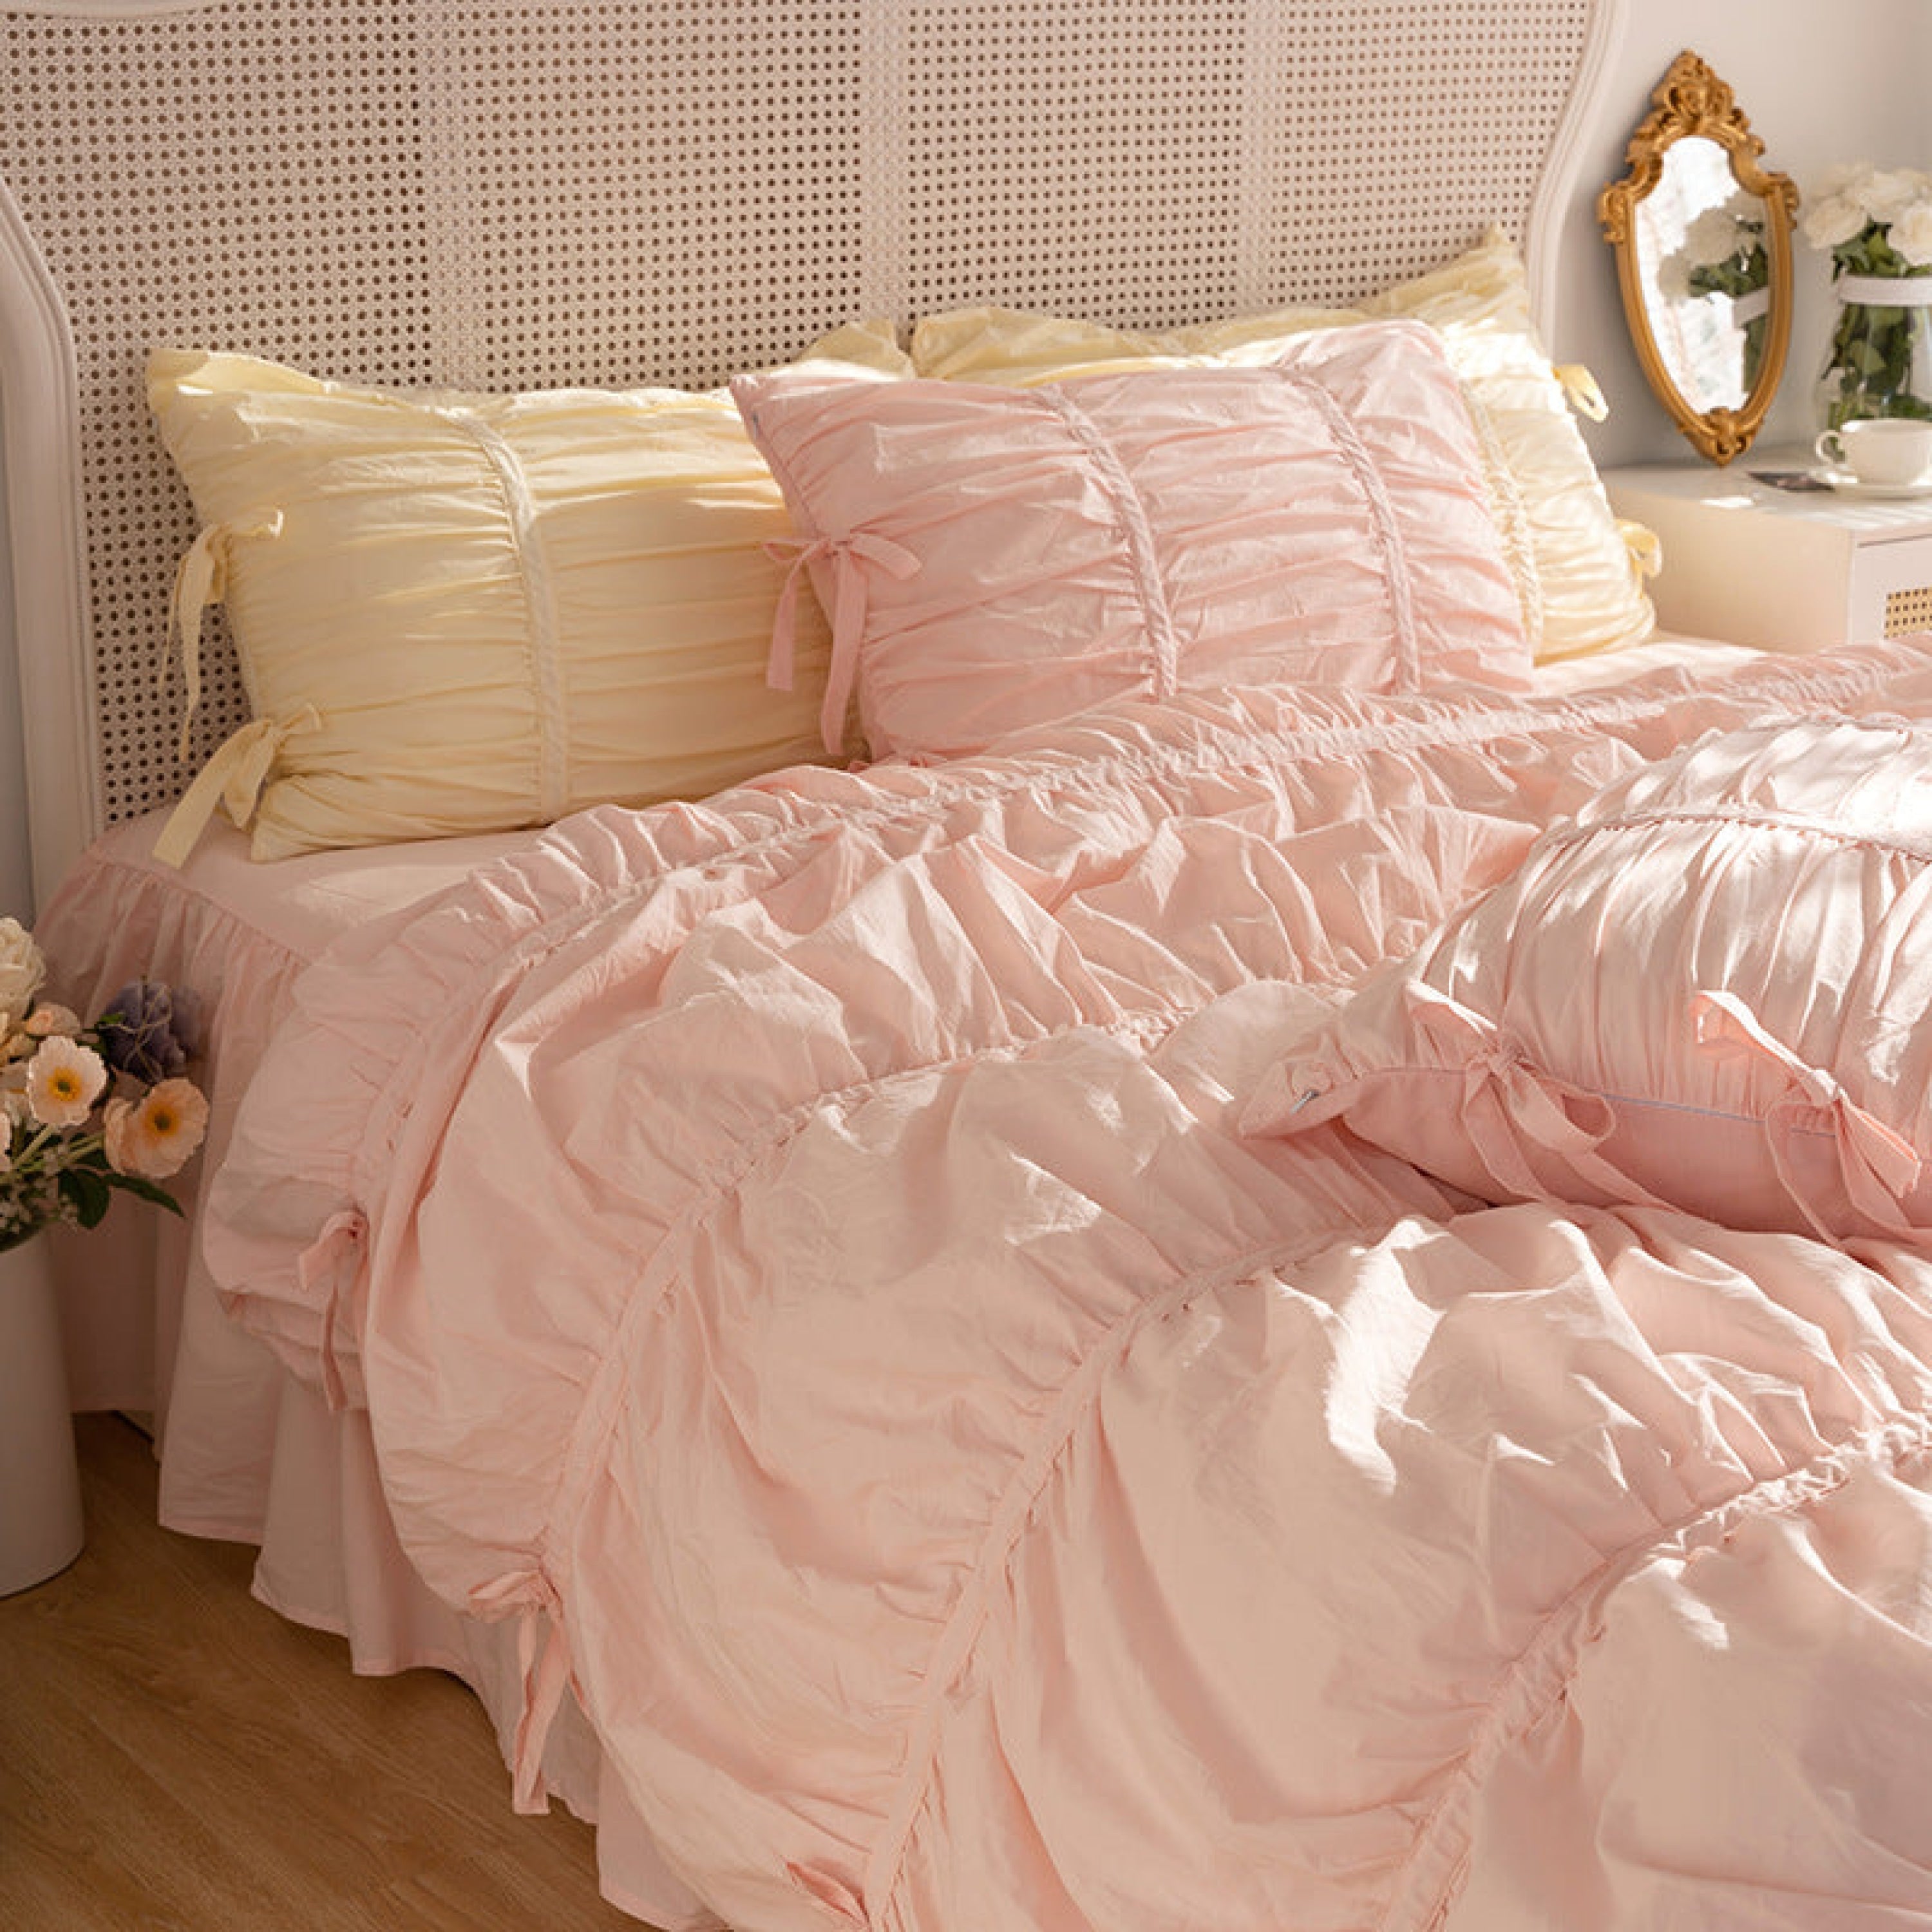 Coquette Ruffle Bedding Set with Ties / Pink